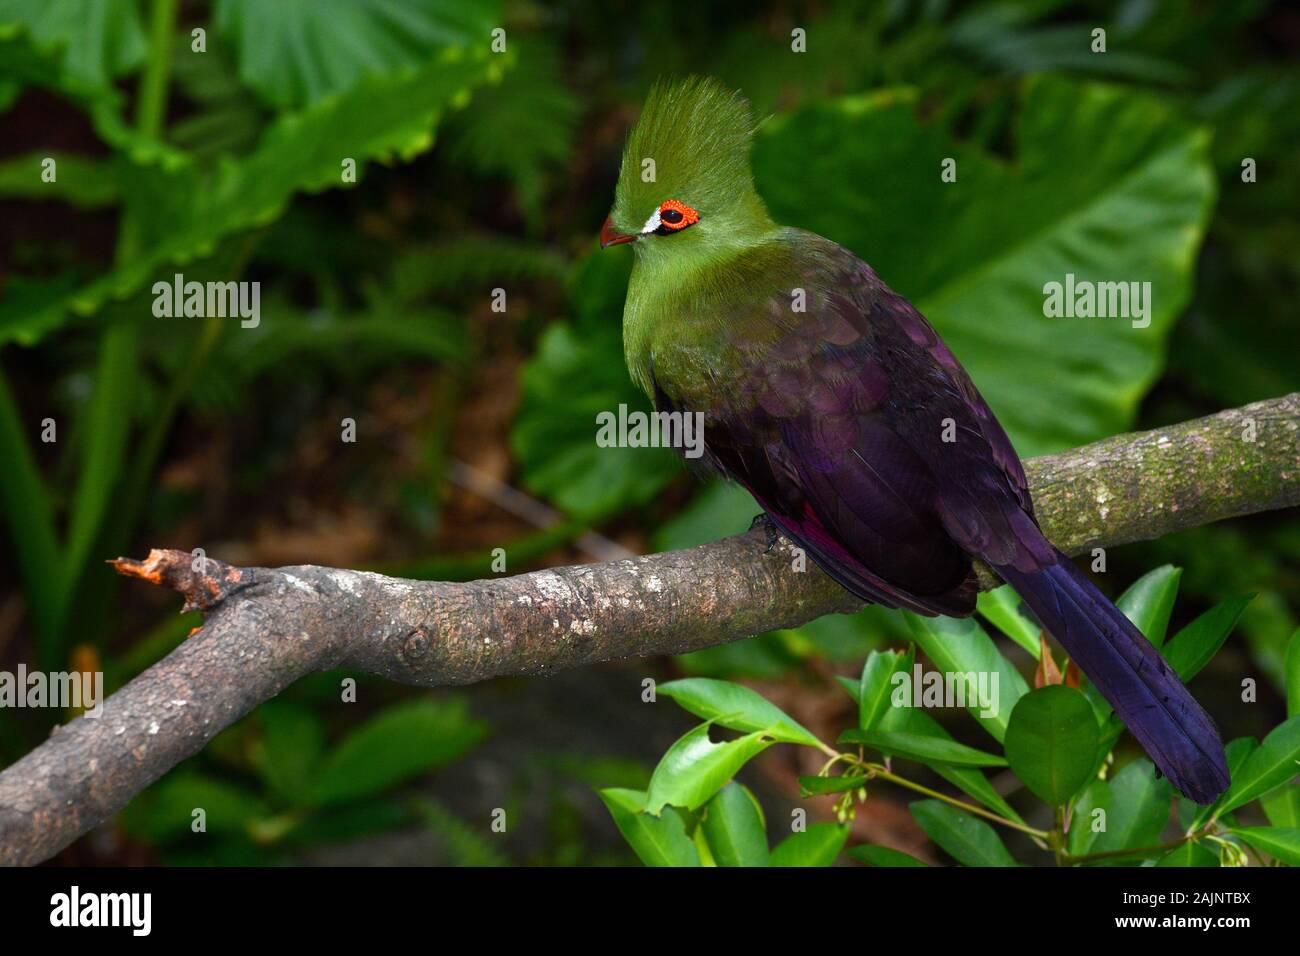 Guinea turaco sitting on a branch, also known by its scientific name Tauraco persa Stock Photo